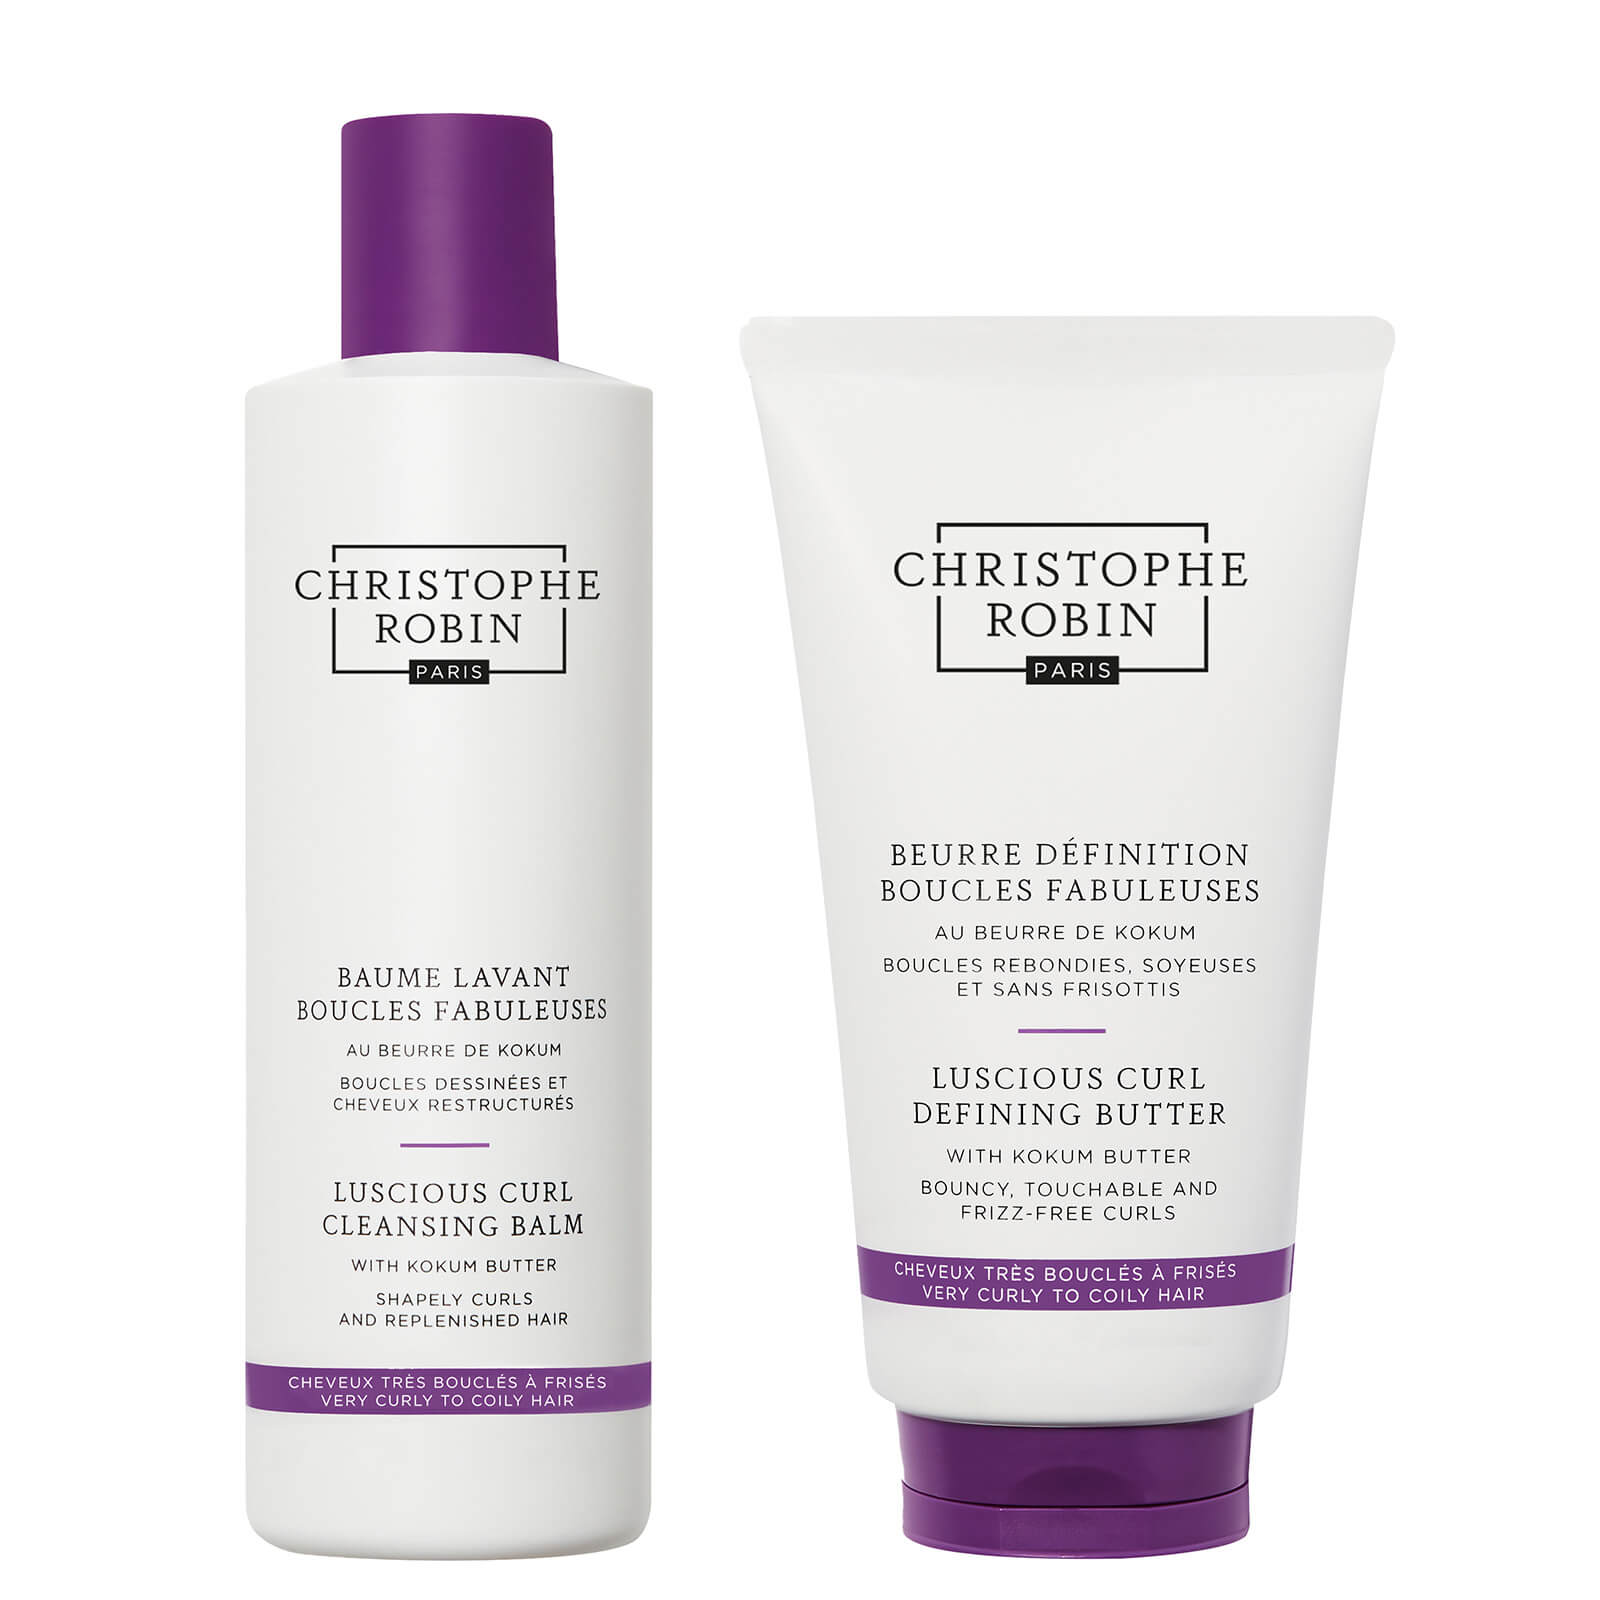 Christophe Robin Luscious Curl Regimen for Curly to Coily Hair